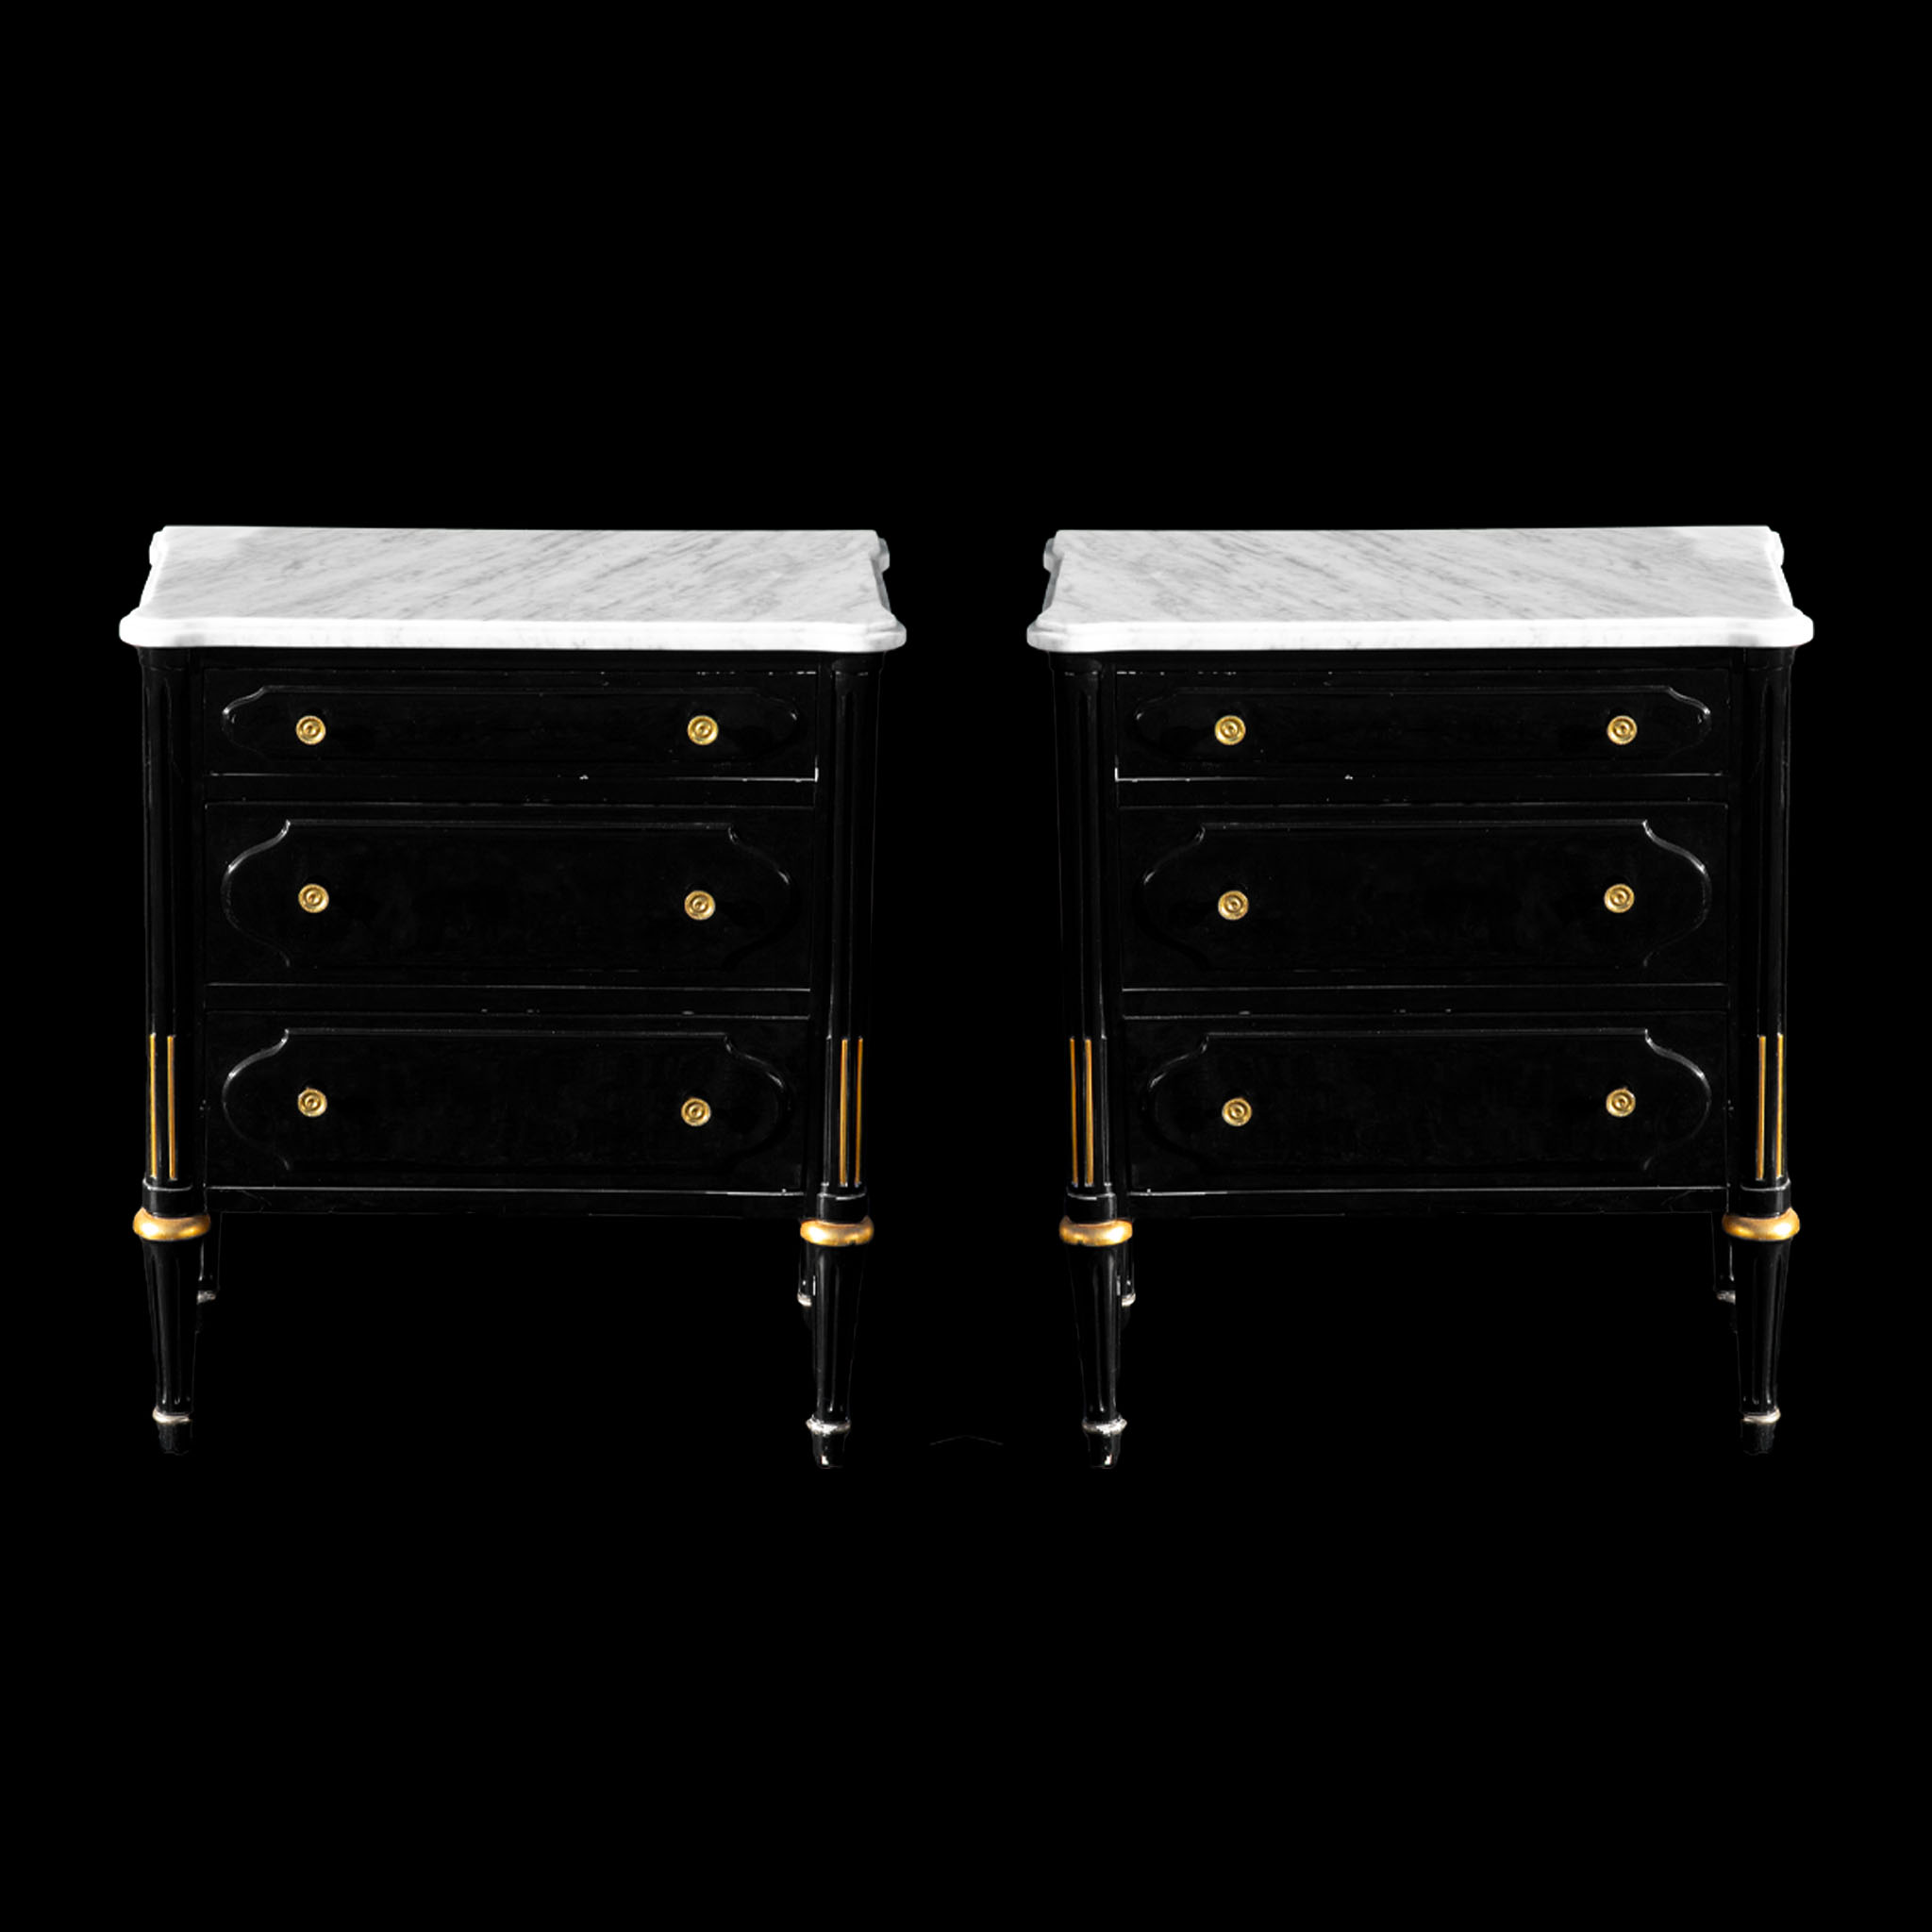 Pair Of Small Black Lacquer, Brass and Marble Dressers